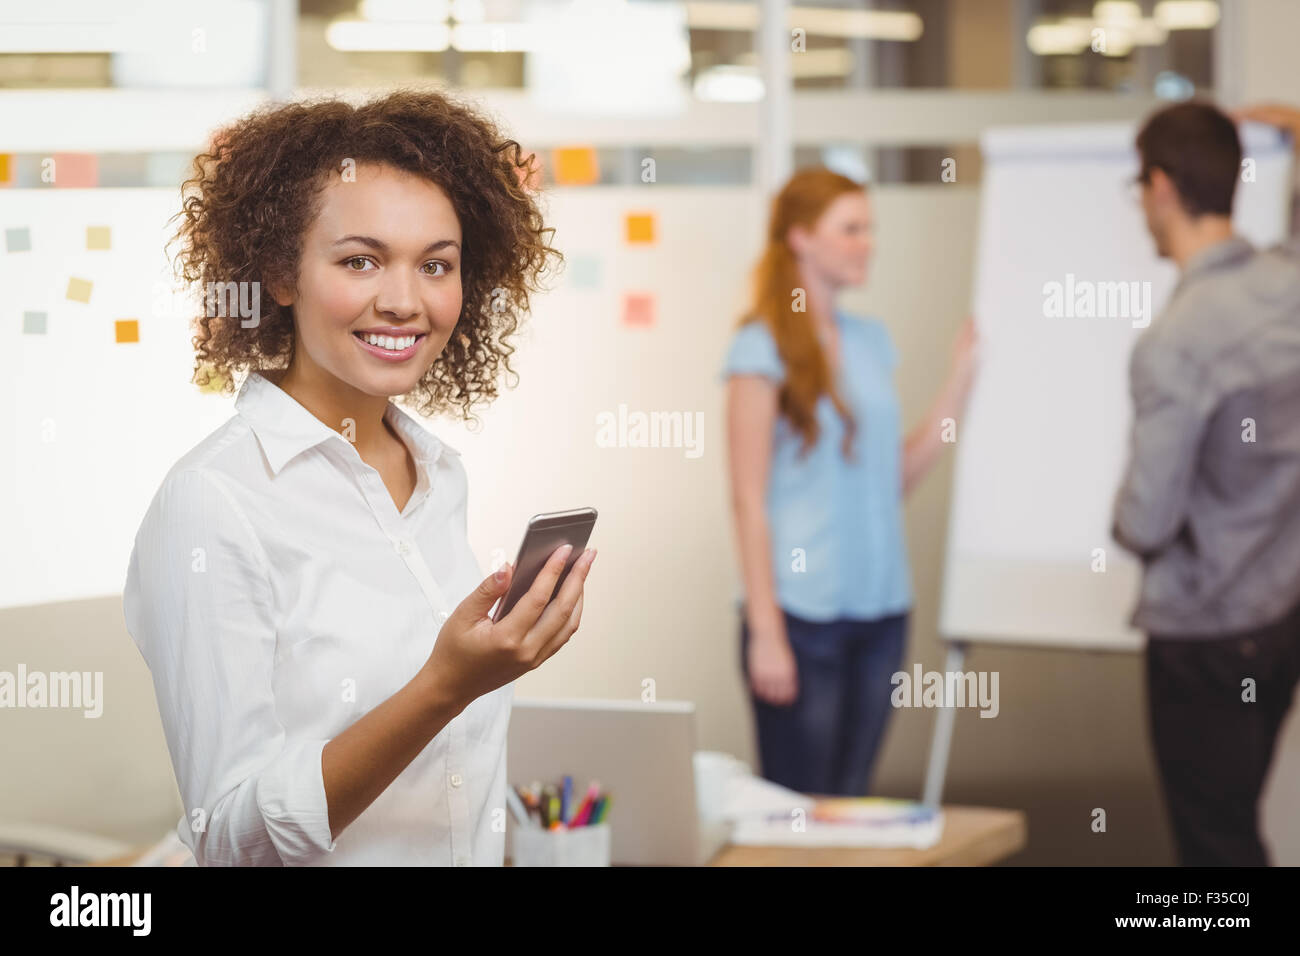 Smiling businesswoman using mobile phone Stock Photo